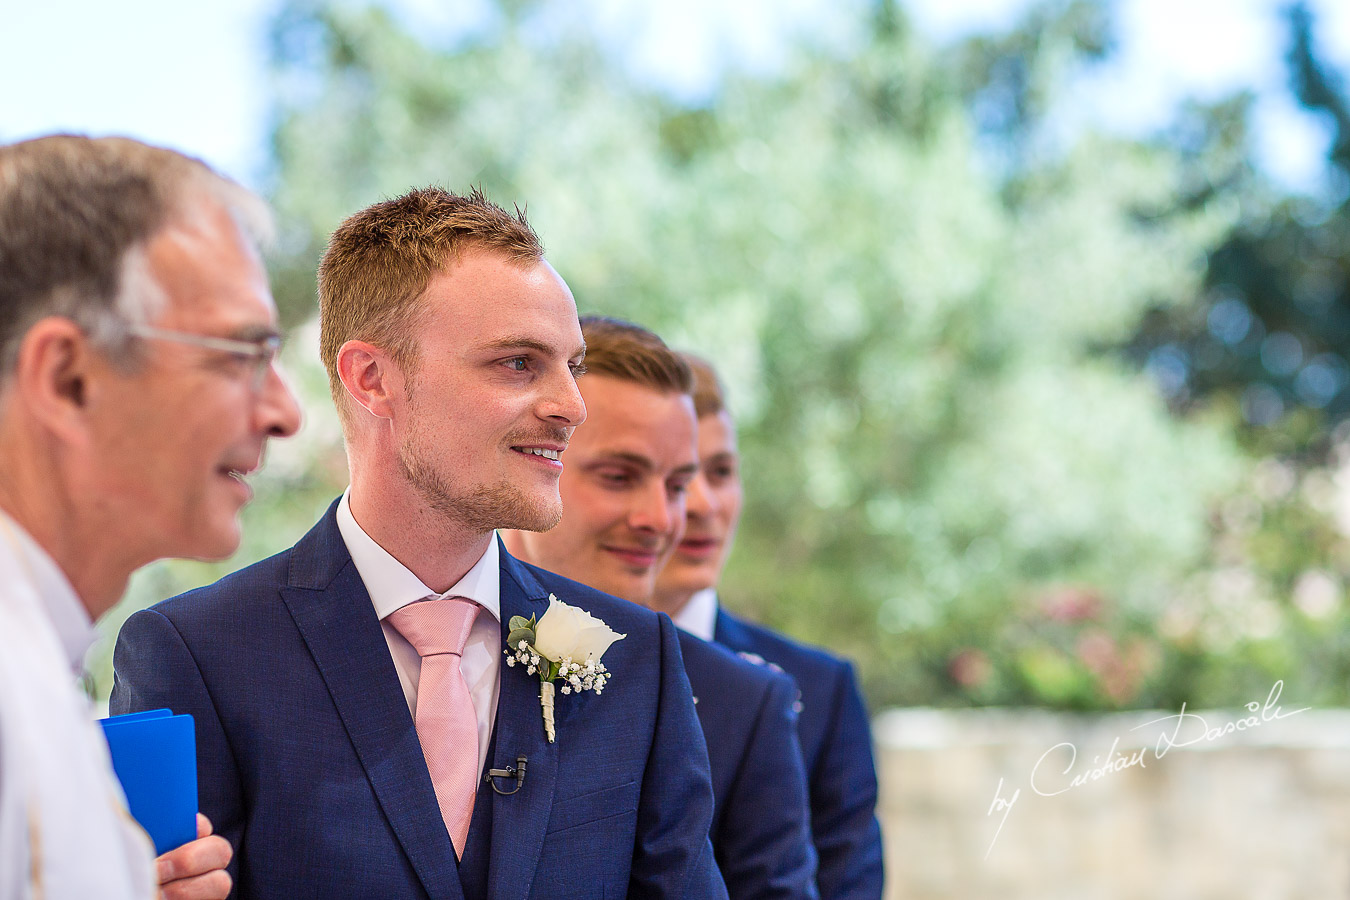 The grooms reaction when the bride arrives at the wedding ceremony at Aphrodite Hills Resort in Cyprus, captured by photographer Cristian Dascalu.